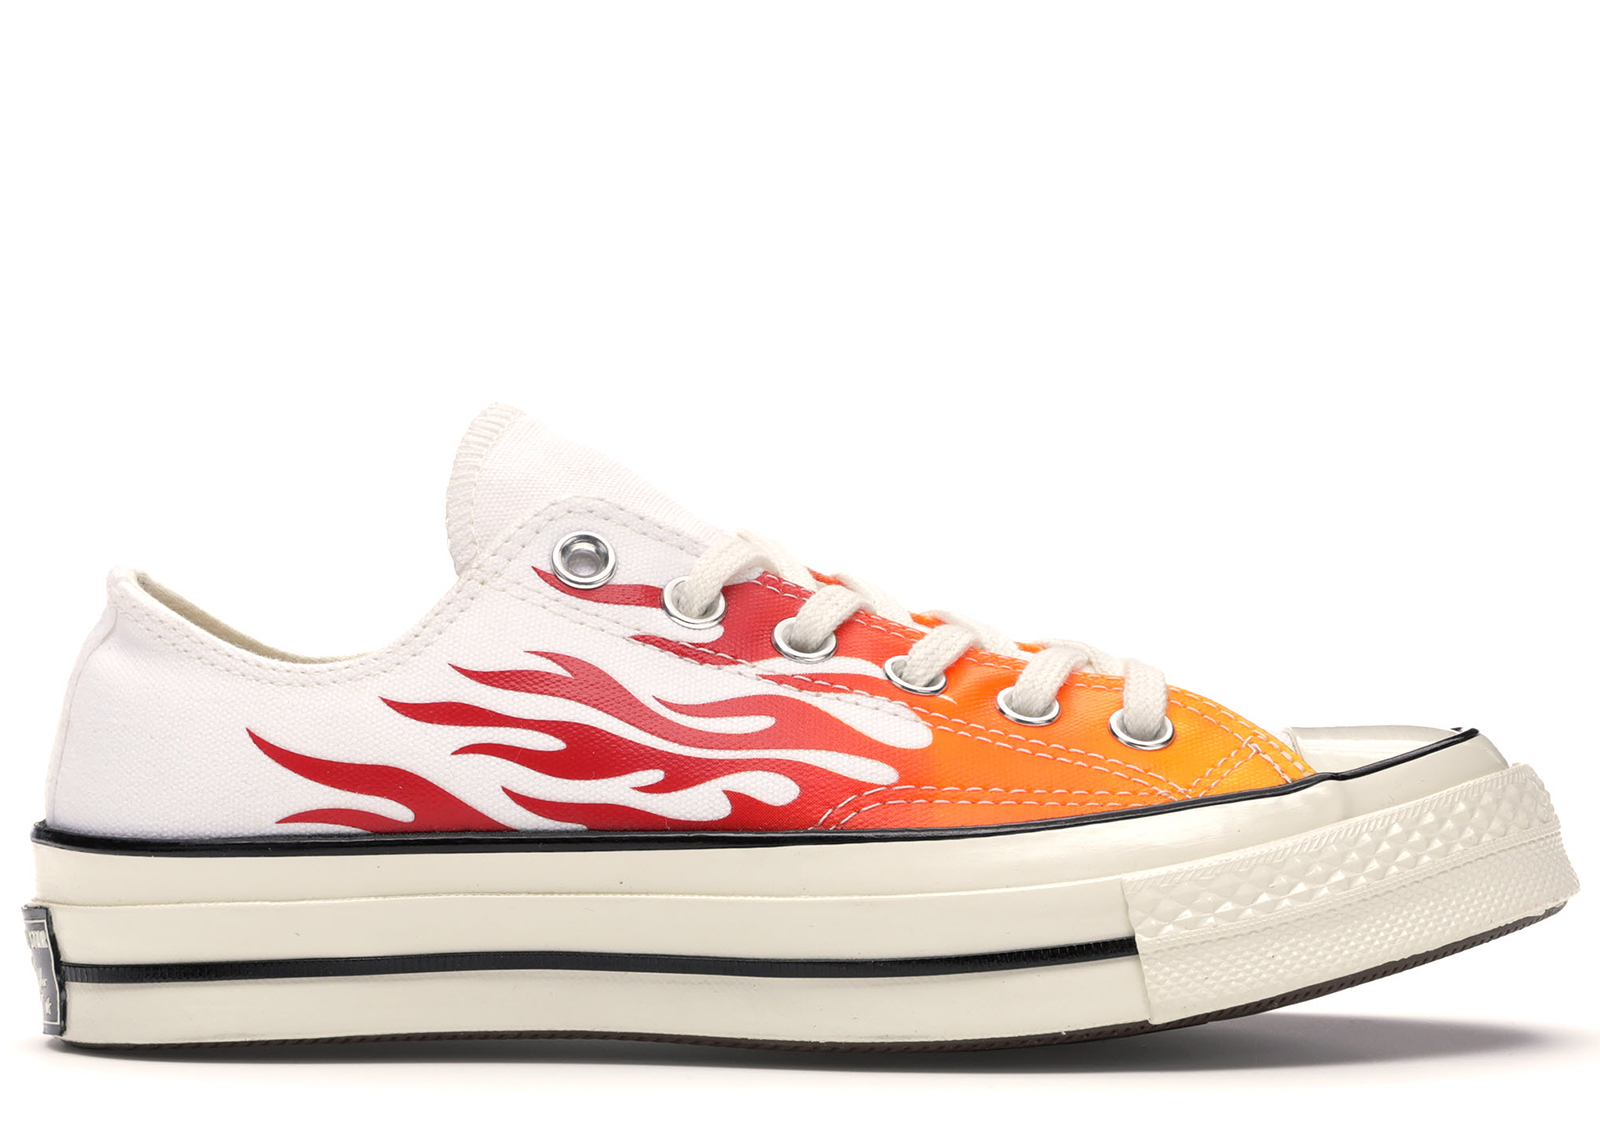 Converse Chuck Taylor All Star 70 Ox Archive Print Flames Men's ...